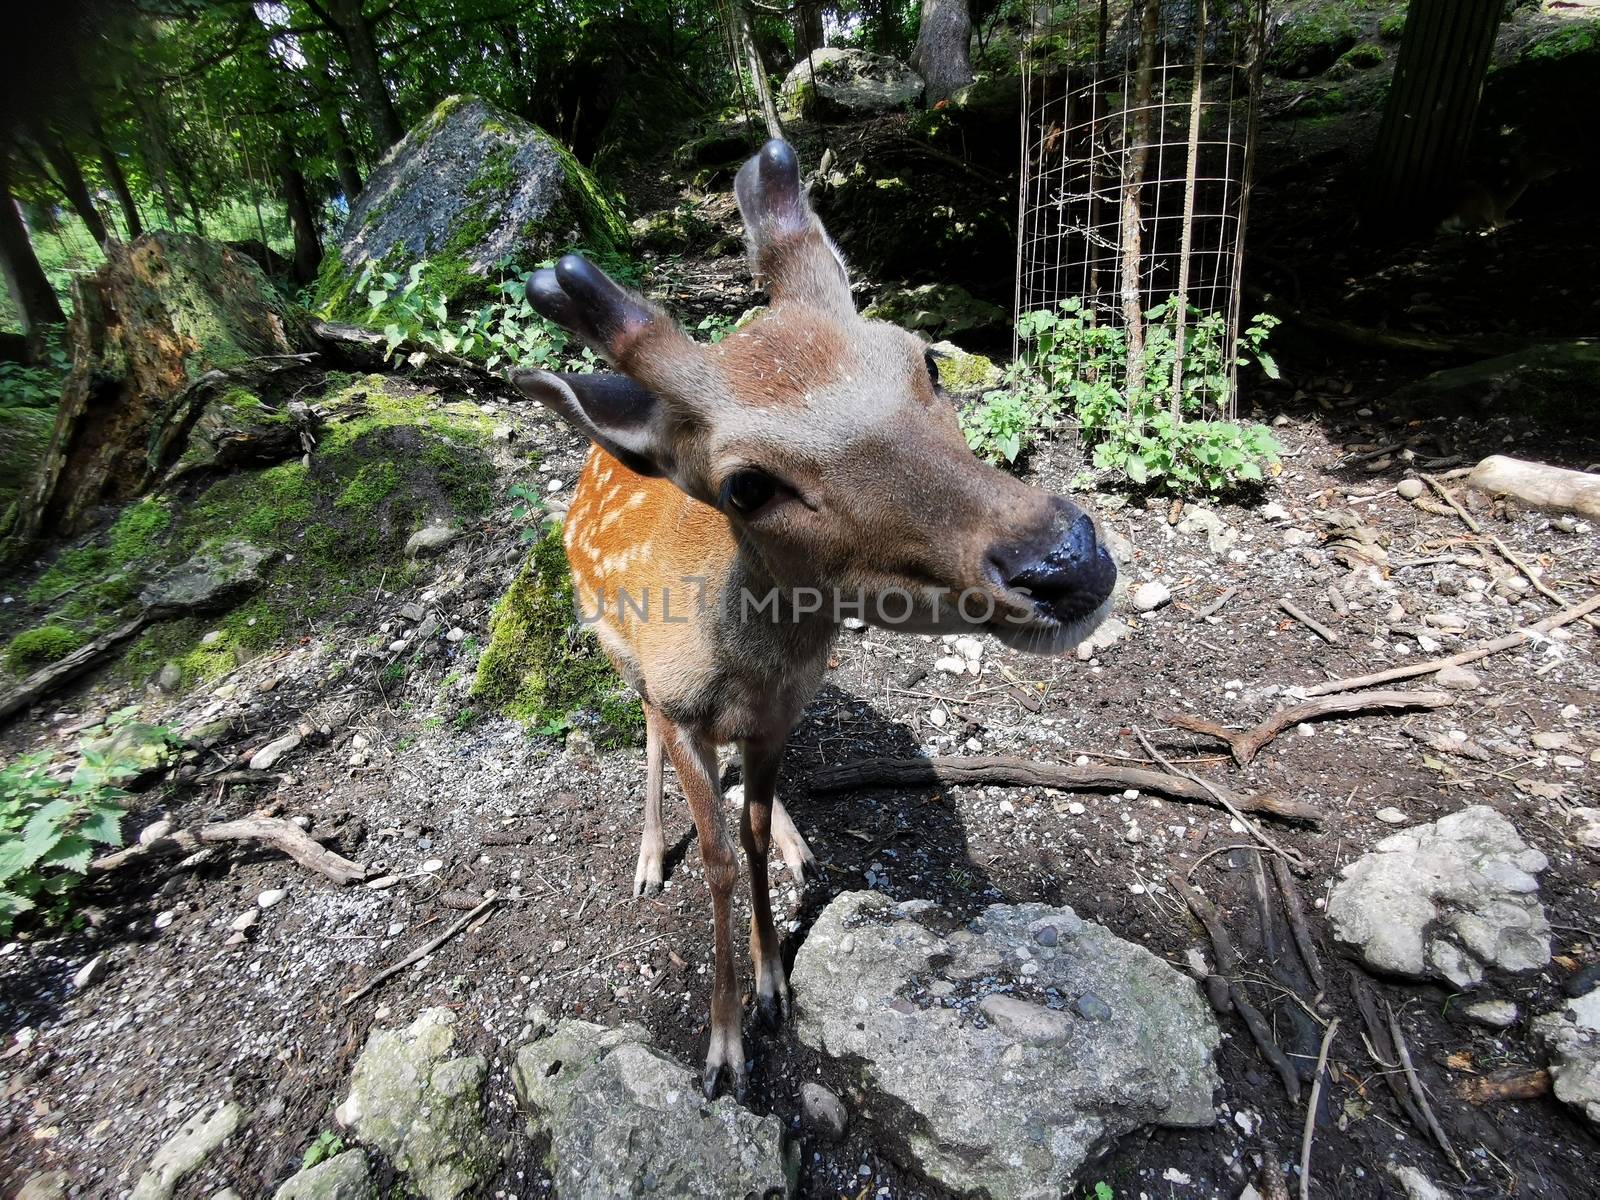 Close up of nose of a deer in forrest